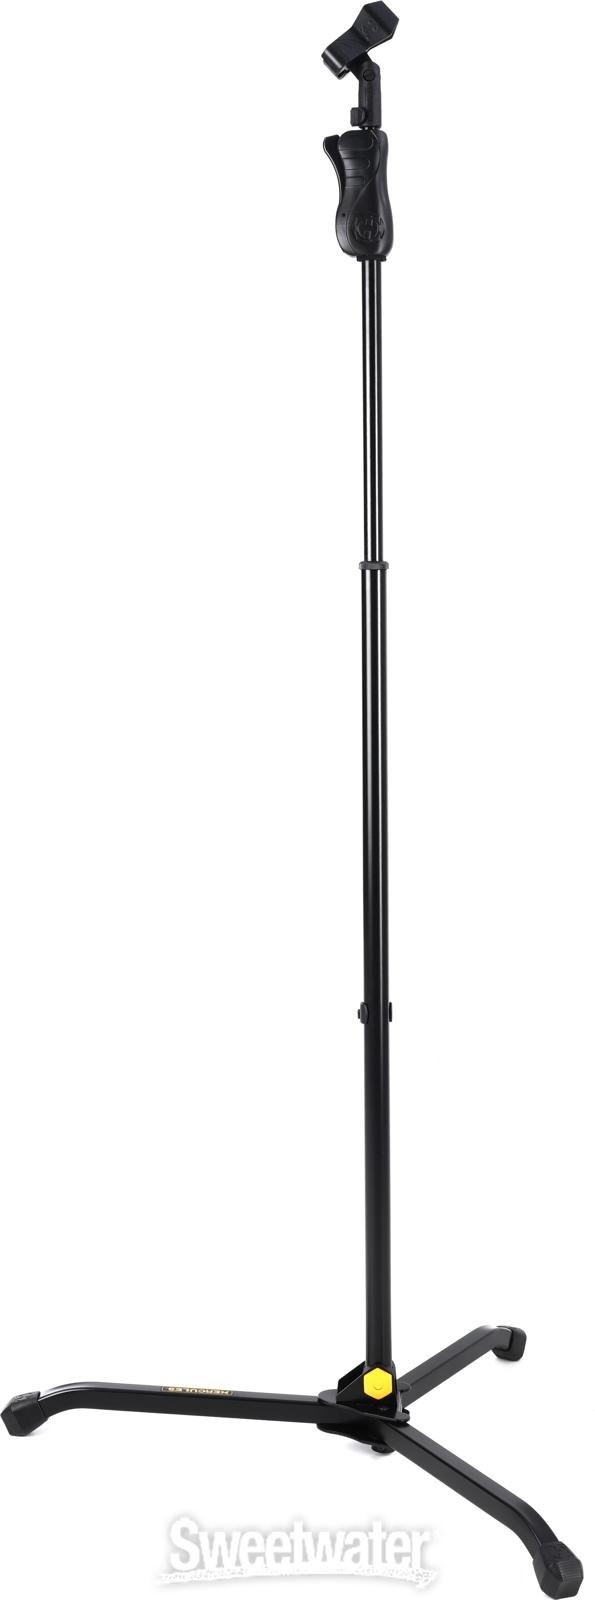 Hercules Stands Transformer Microphone Stand With Clip